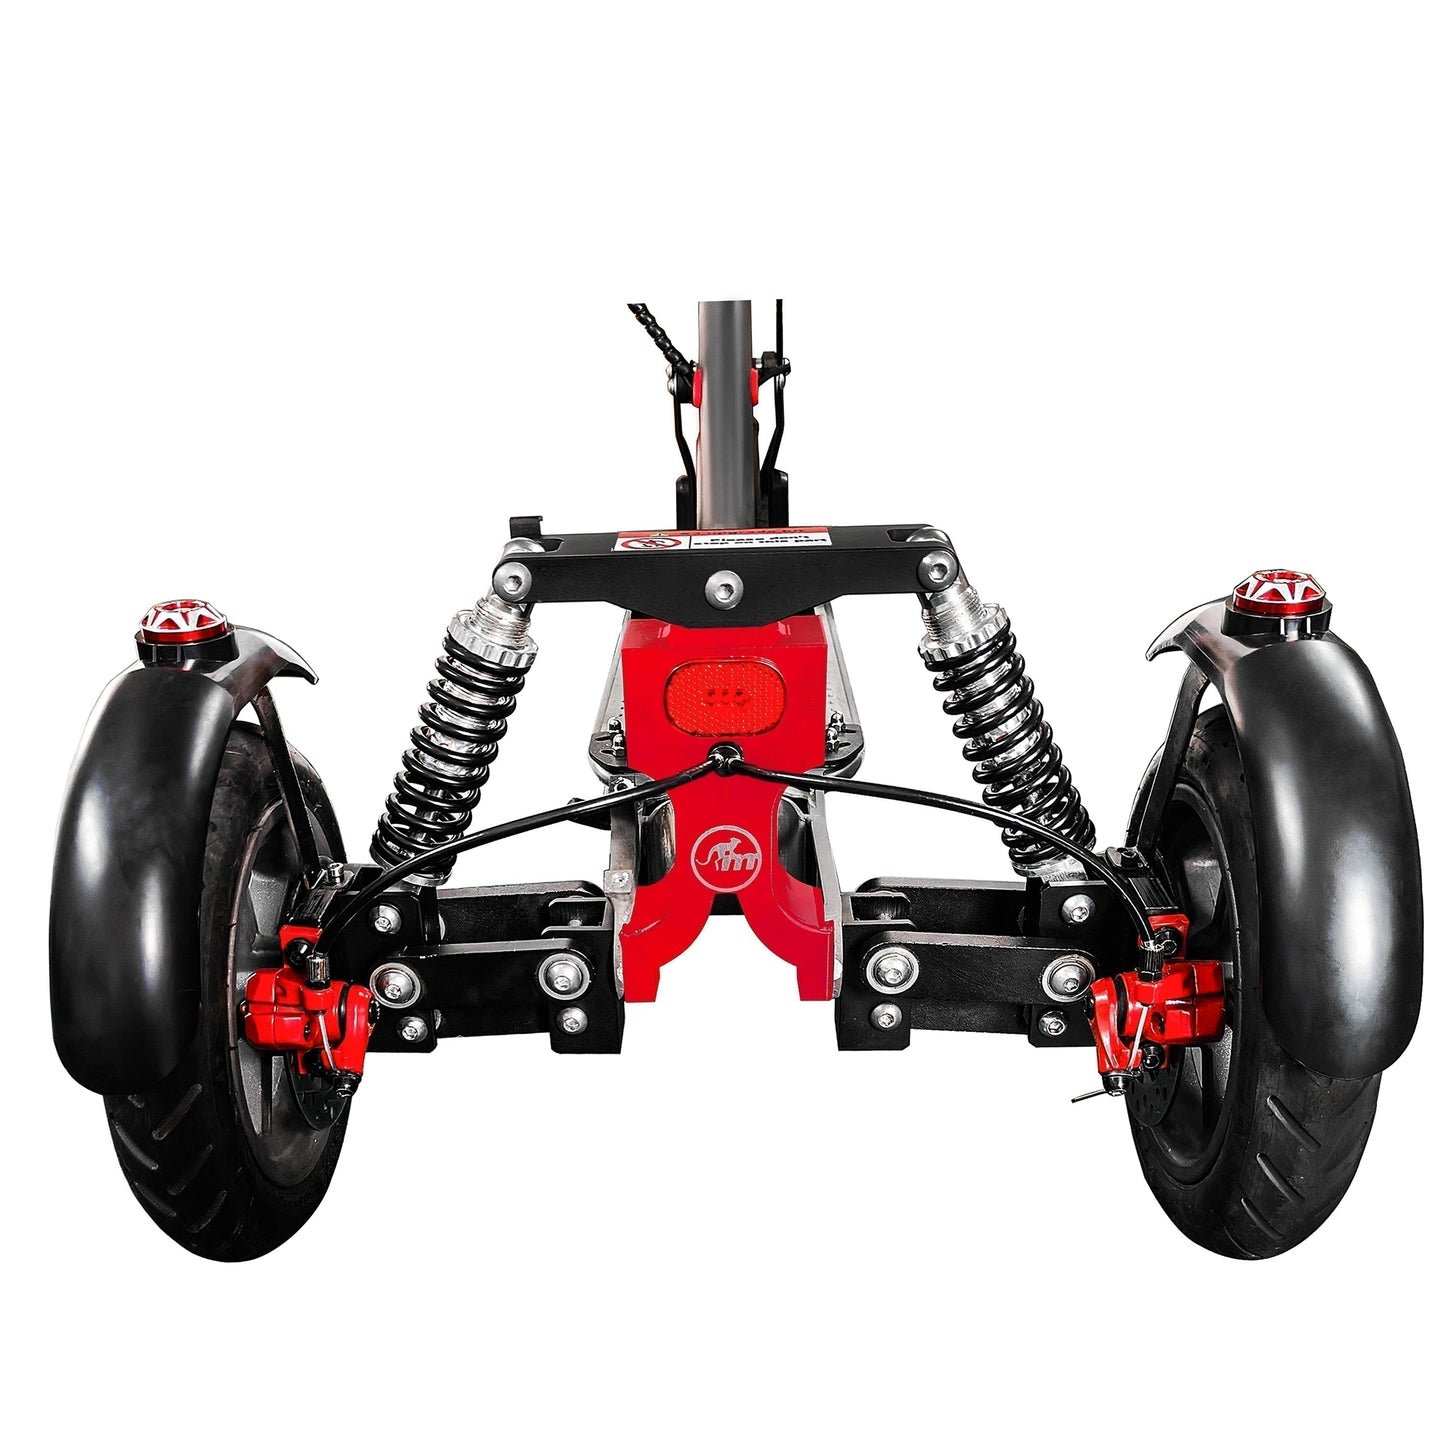 Monorim X3 upgrade kit to be Three wheels special for iscooter i8 frames